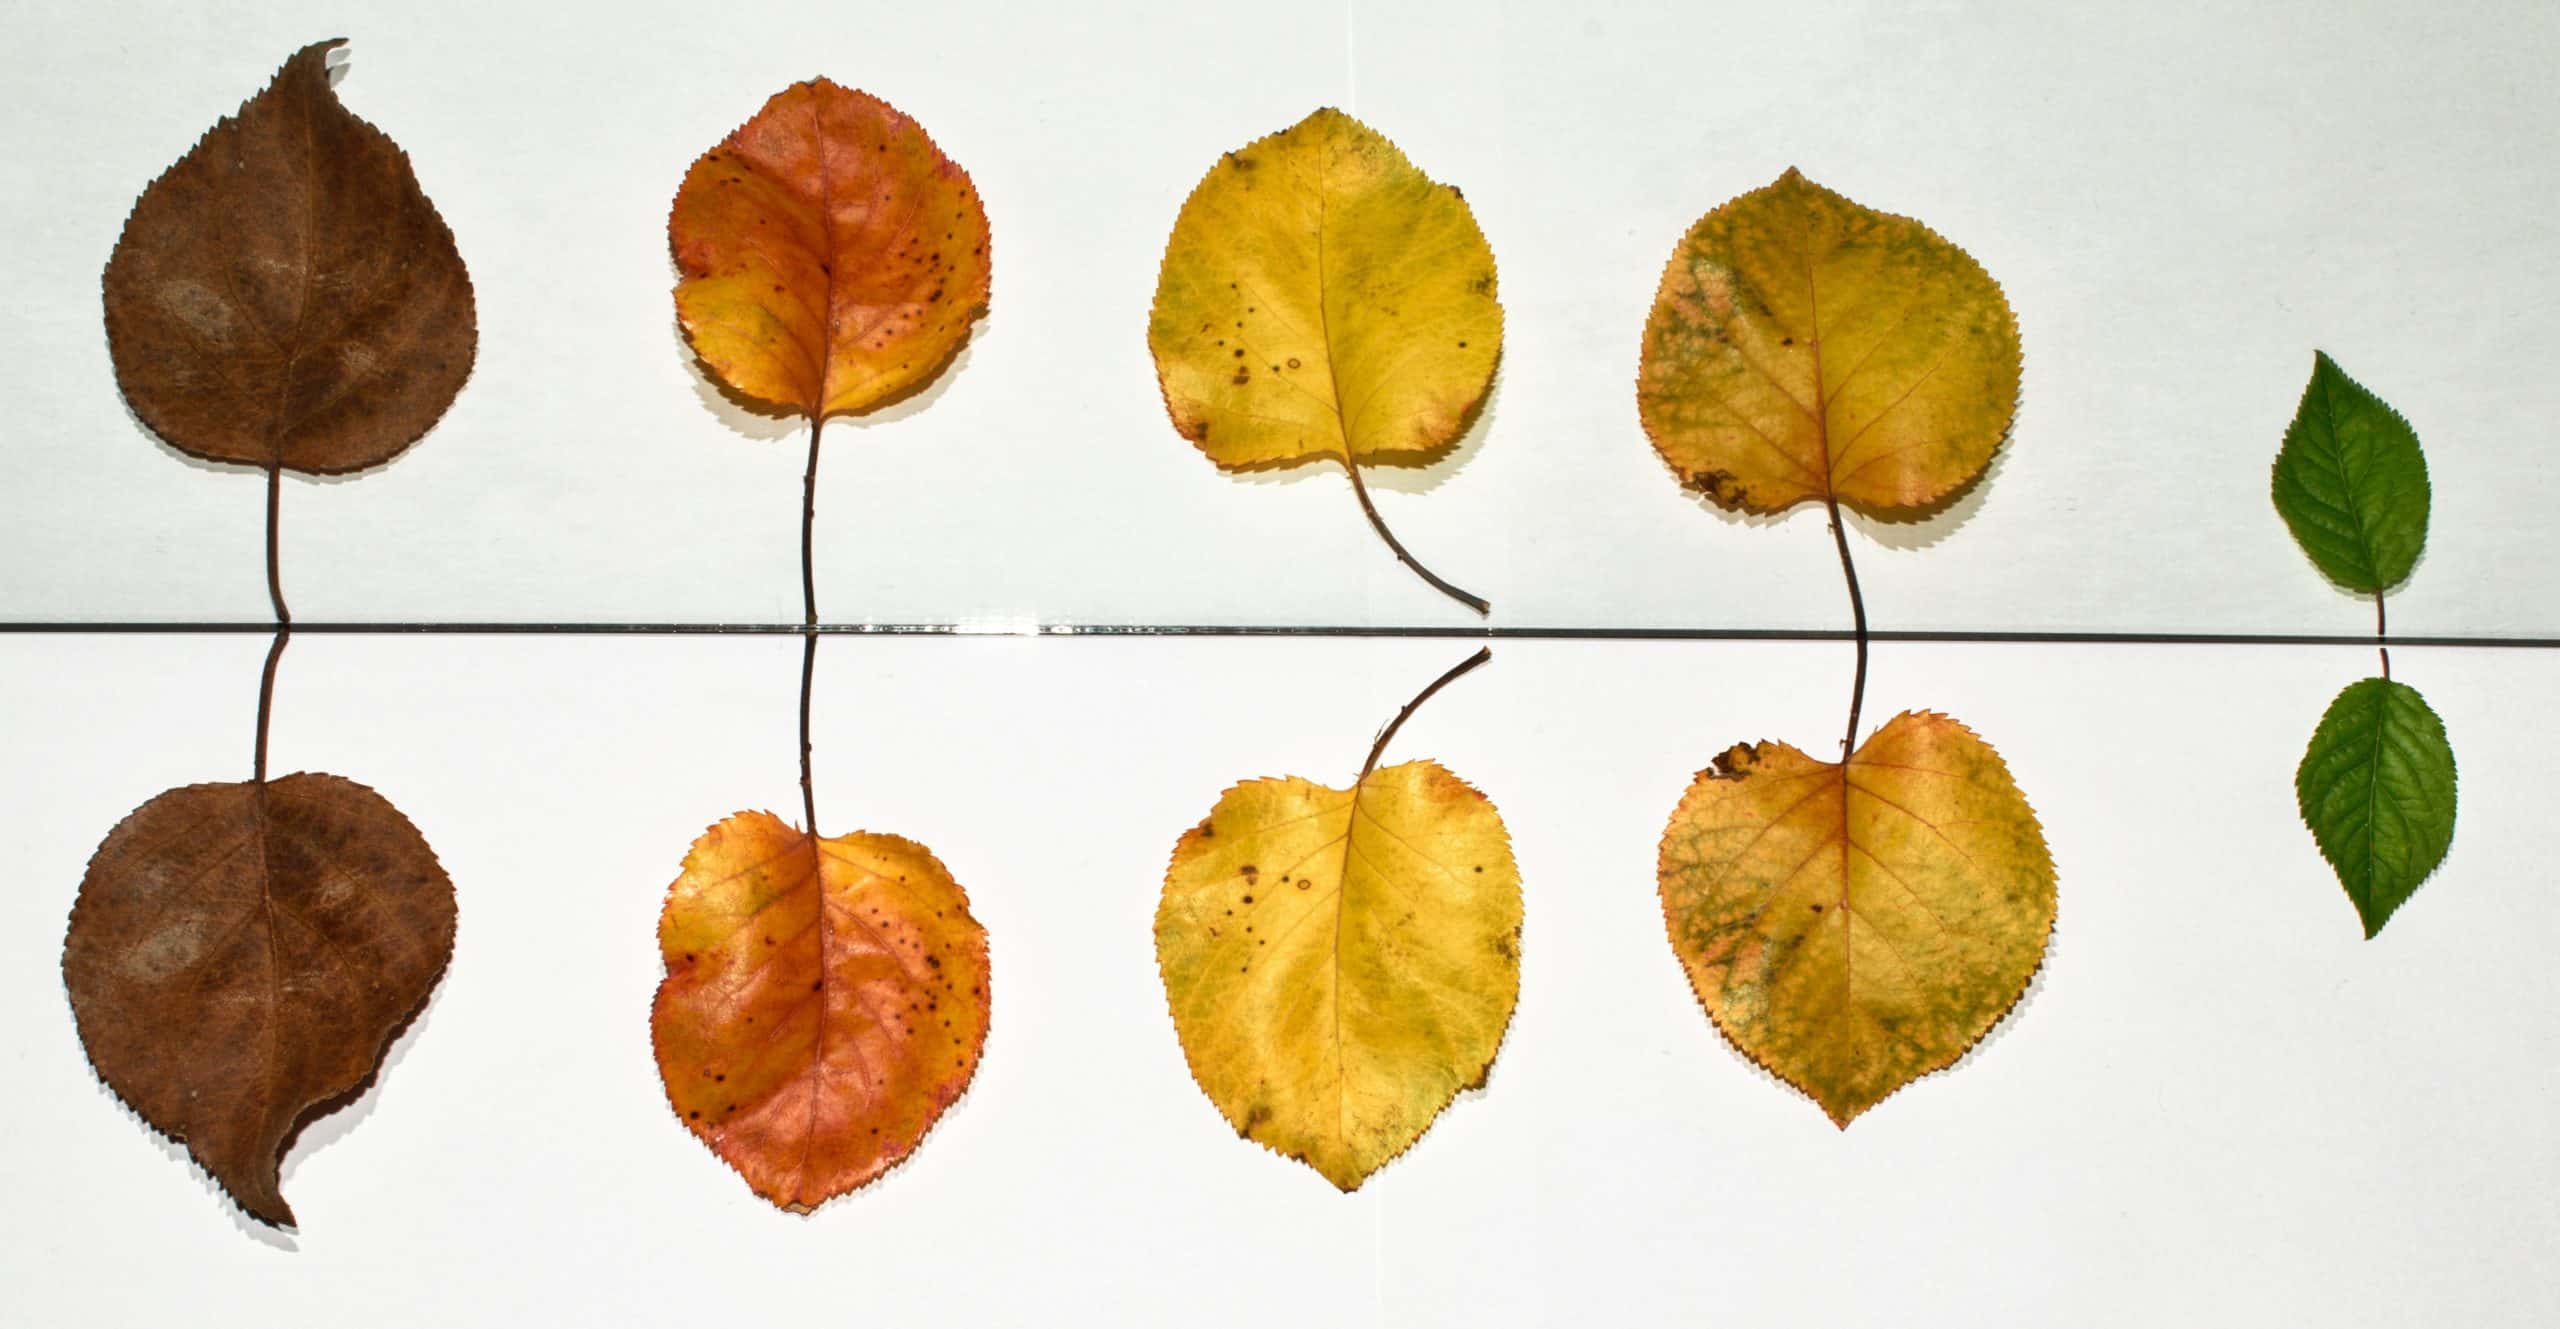 Leaves of different shapes, sizes, and colors next to each other